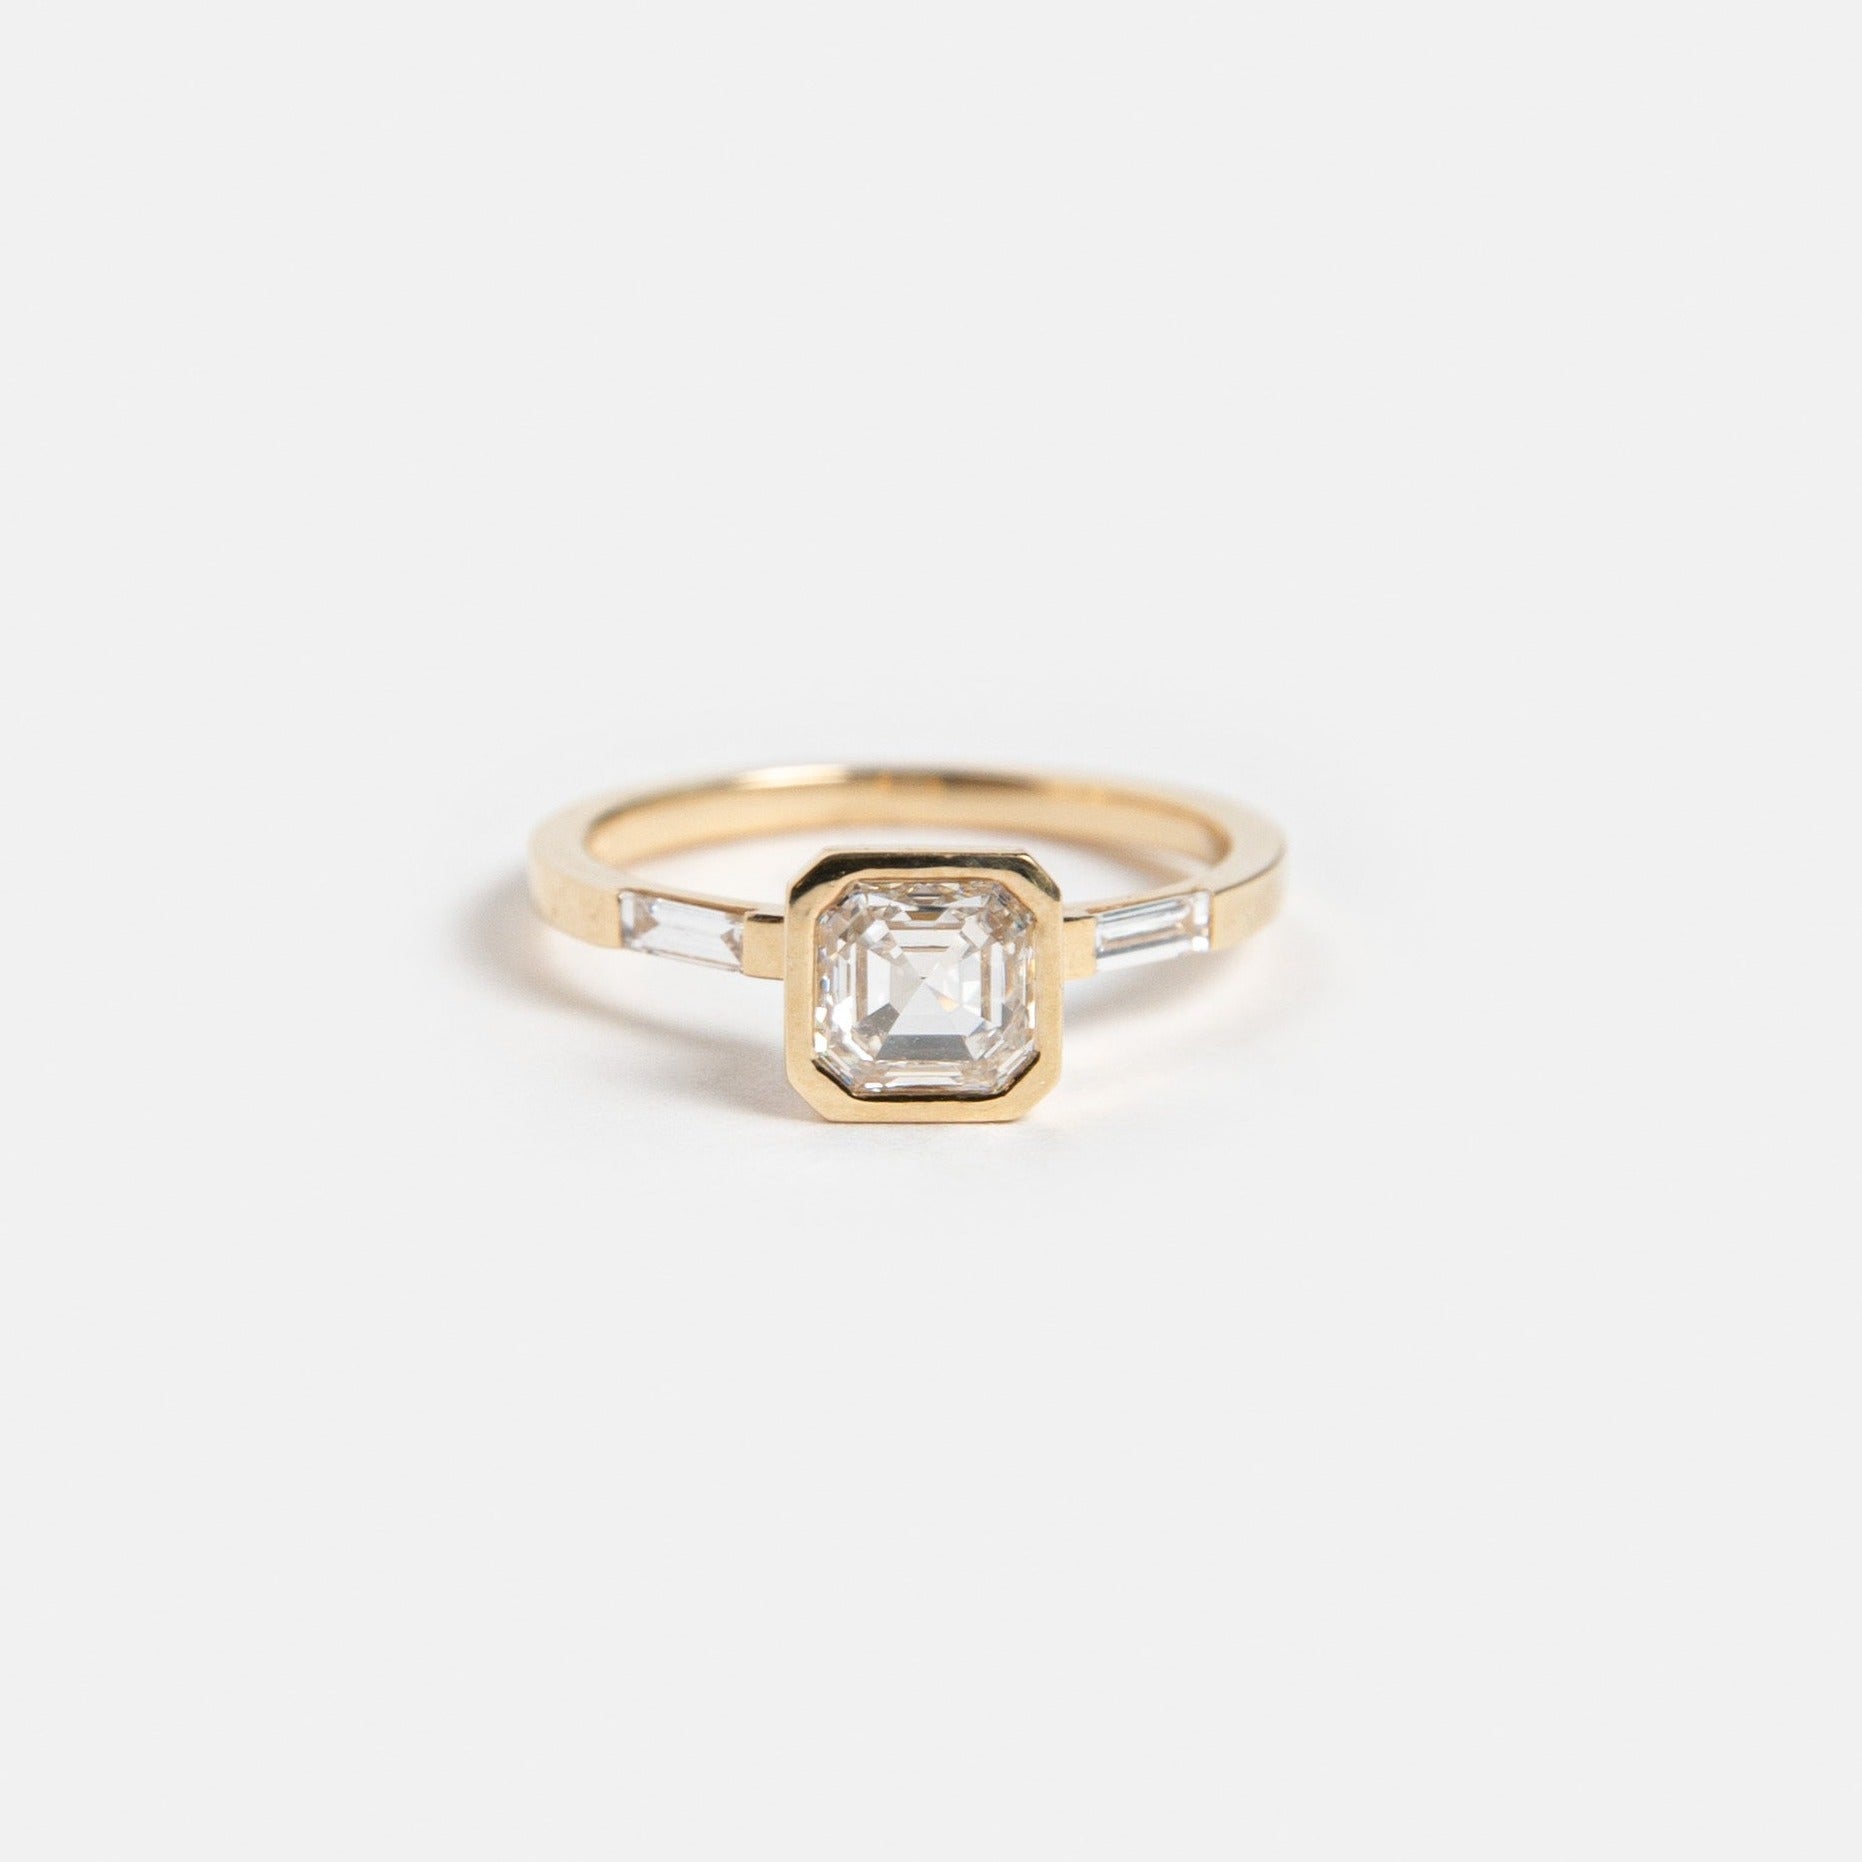 Aida Ring with 1.58ct Lab-grown Diamond in Gold by SHW Jewelry